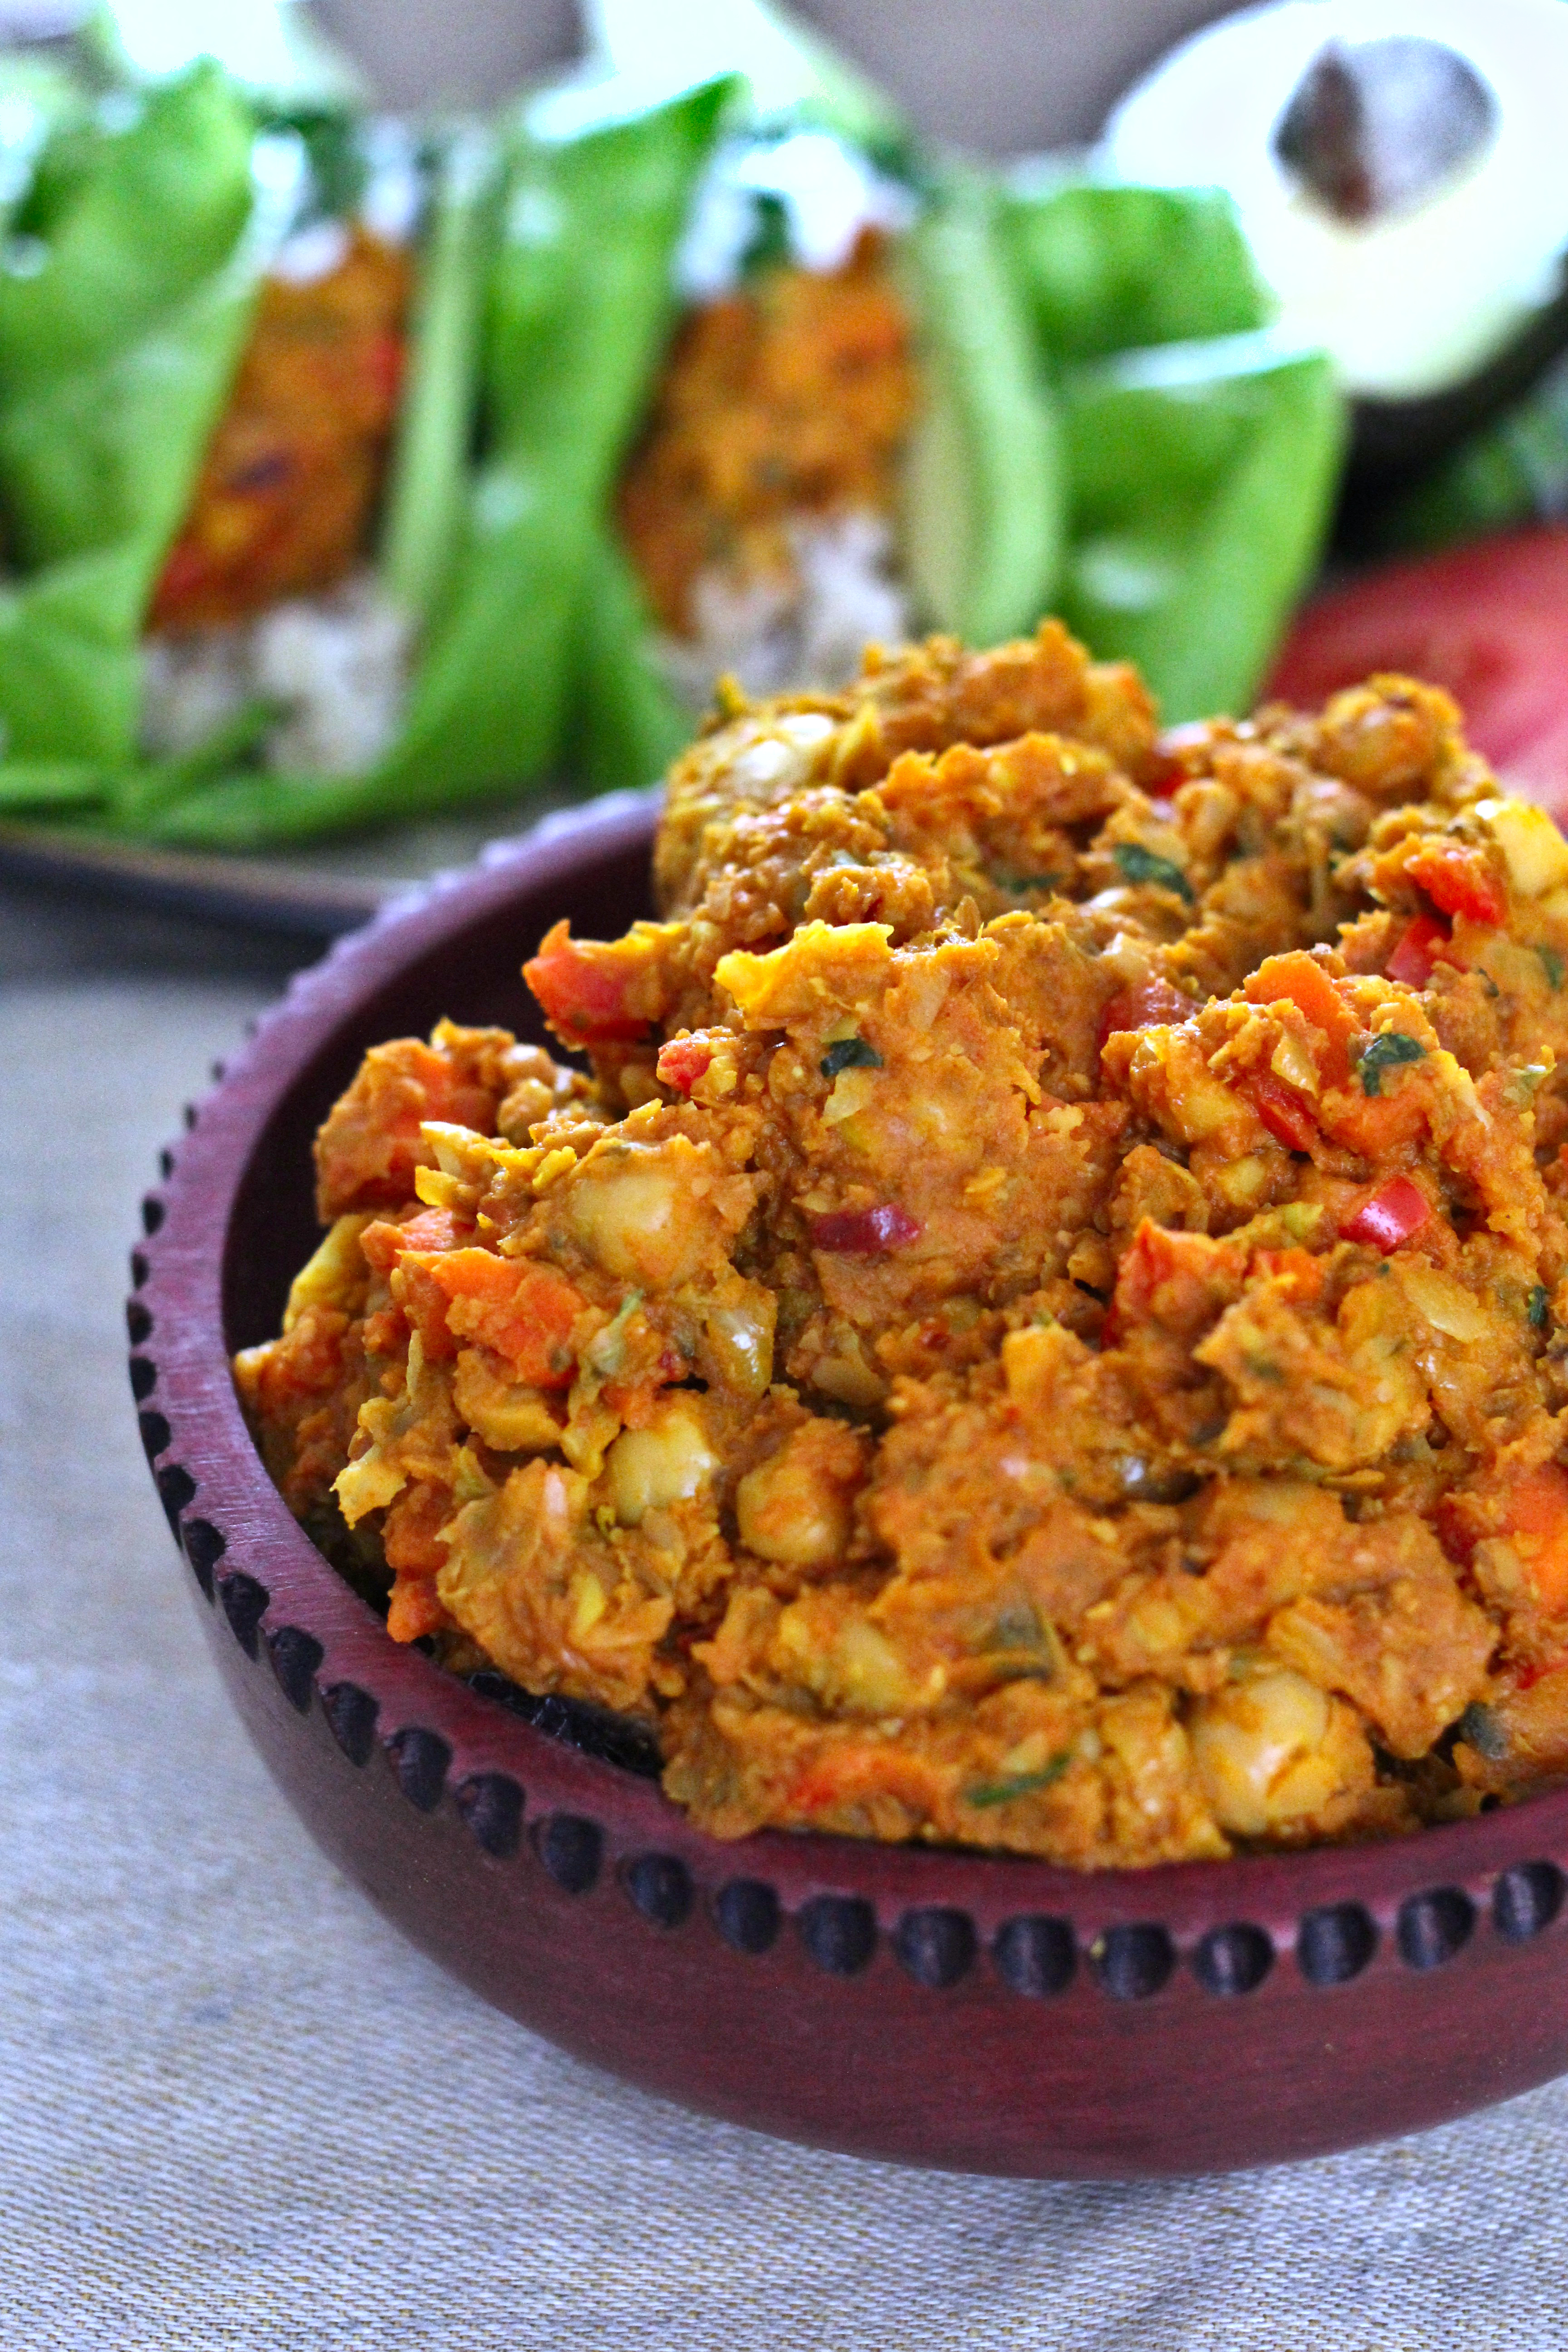 Curried chickpea filling